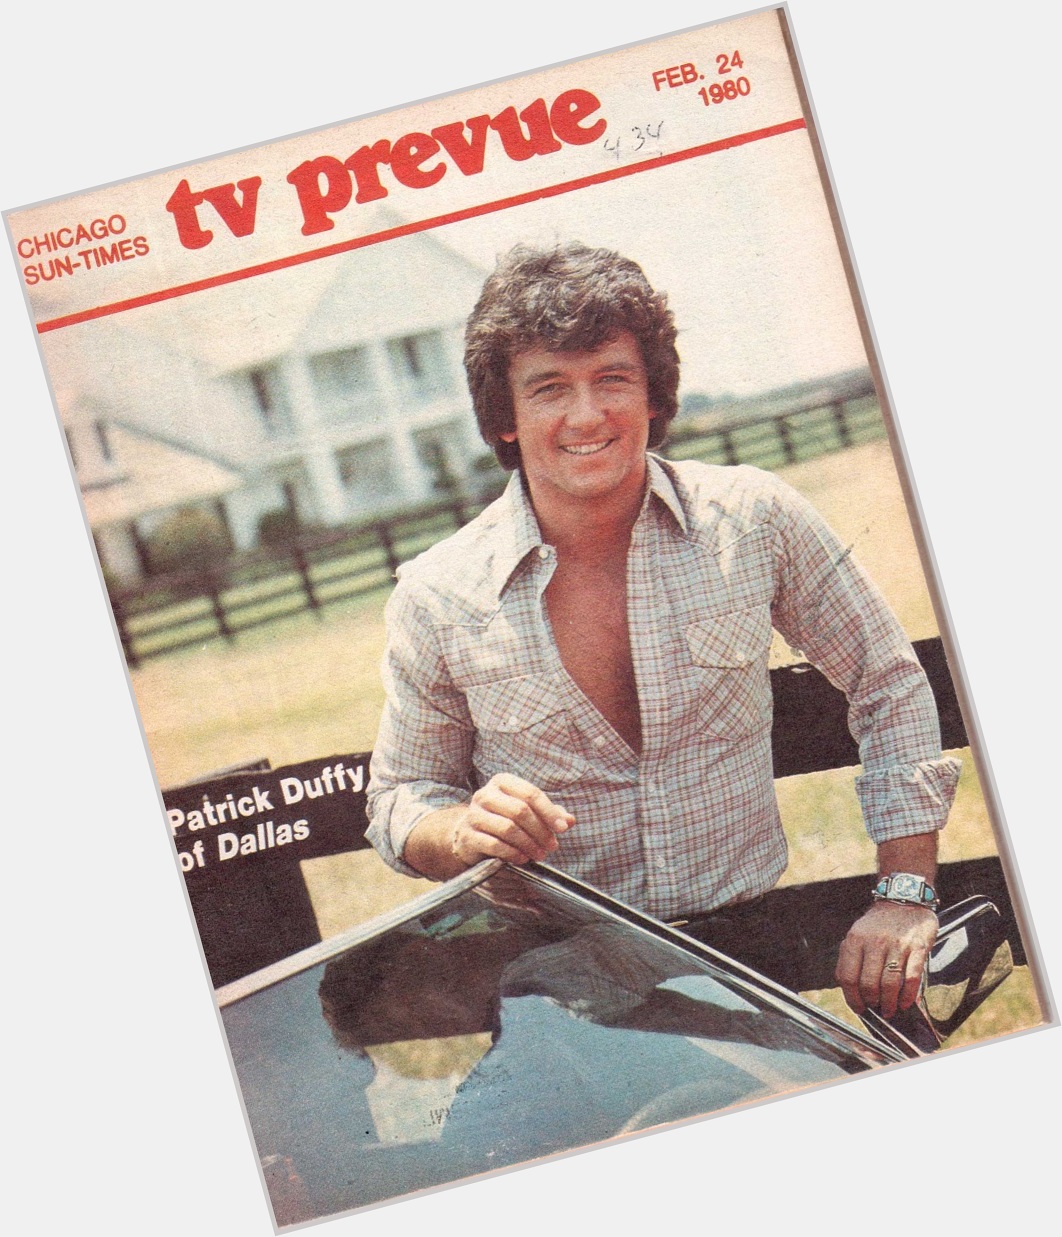 Happy Birthday to Patrick Duffy, born on this day in 1949
Chicago Sun-Times TV Prevue.  February 2-8, 1980 